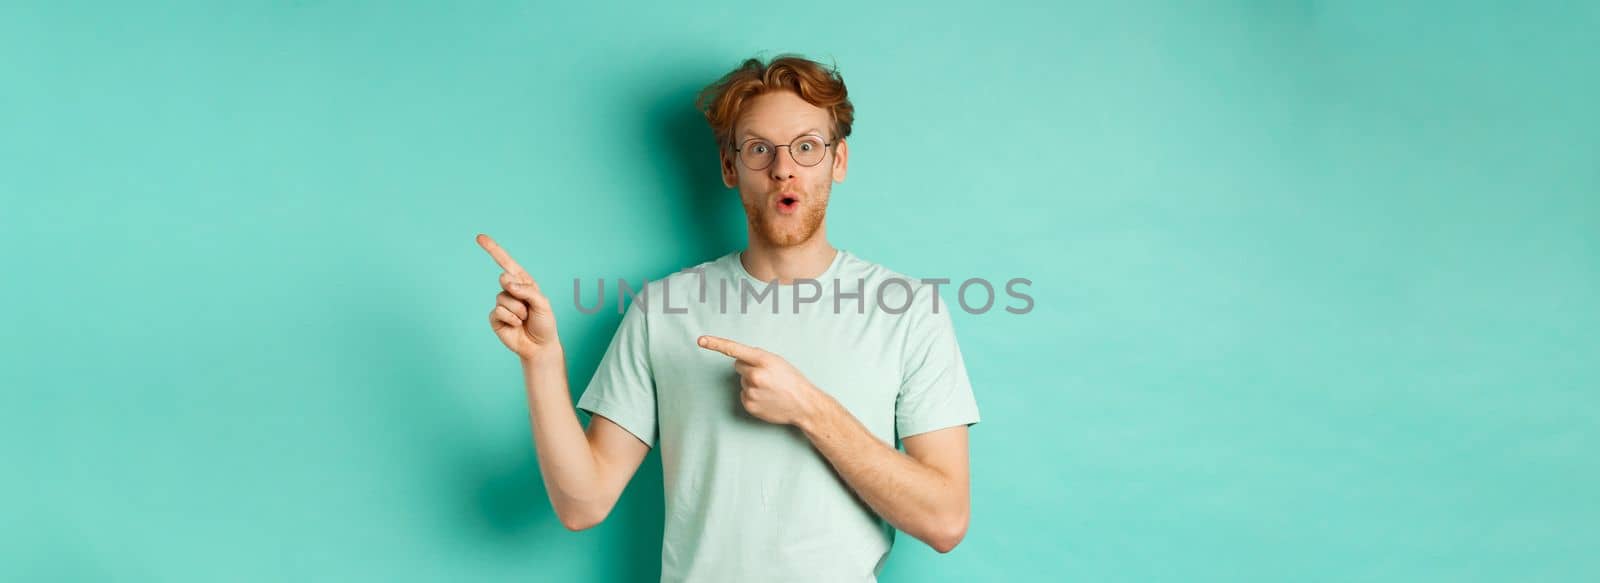 Surprised redhead guy in glasses and t-shirt checking out special deal, pointing at upper right corner promo and gasping in awe, showing banner, standing over turquoise background.